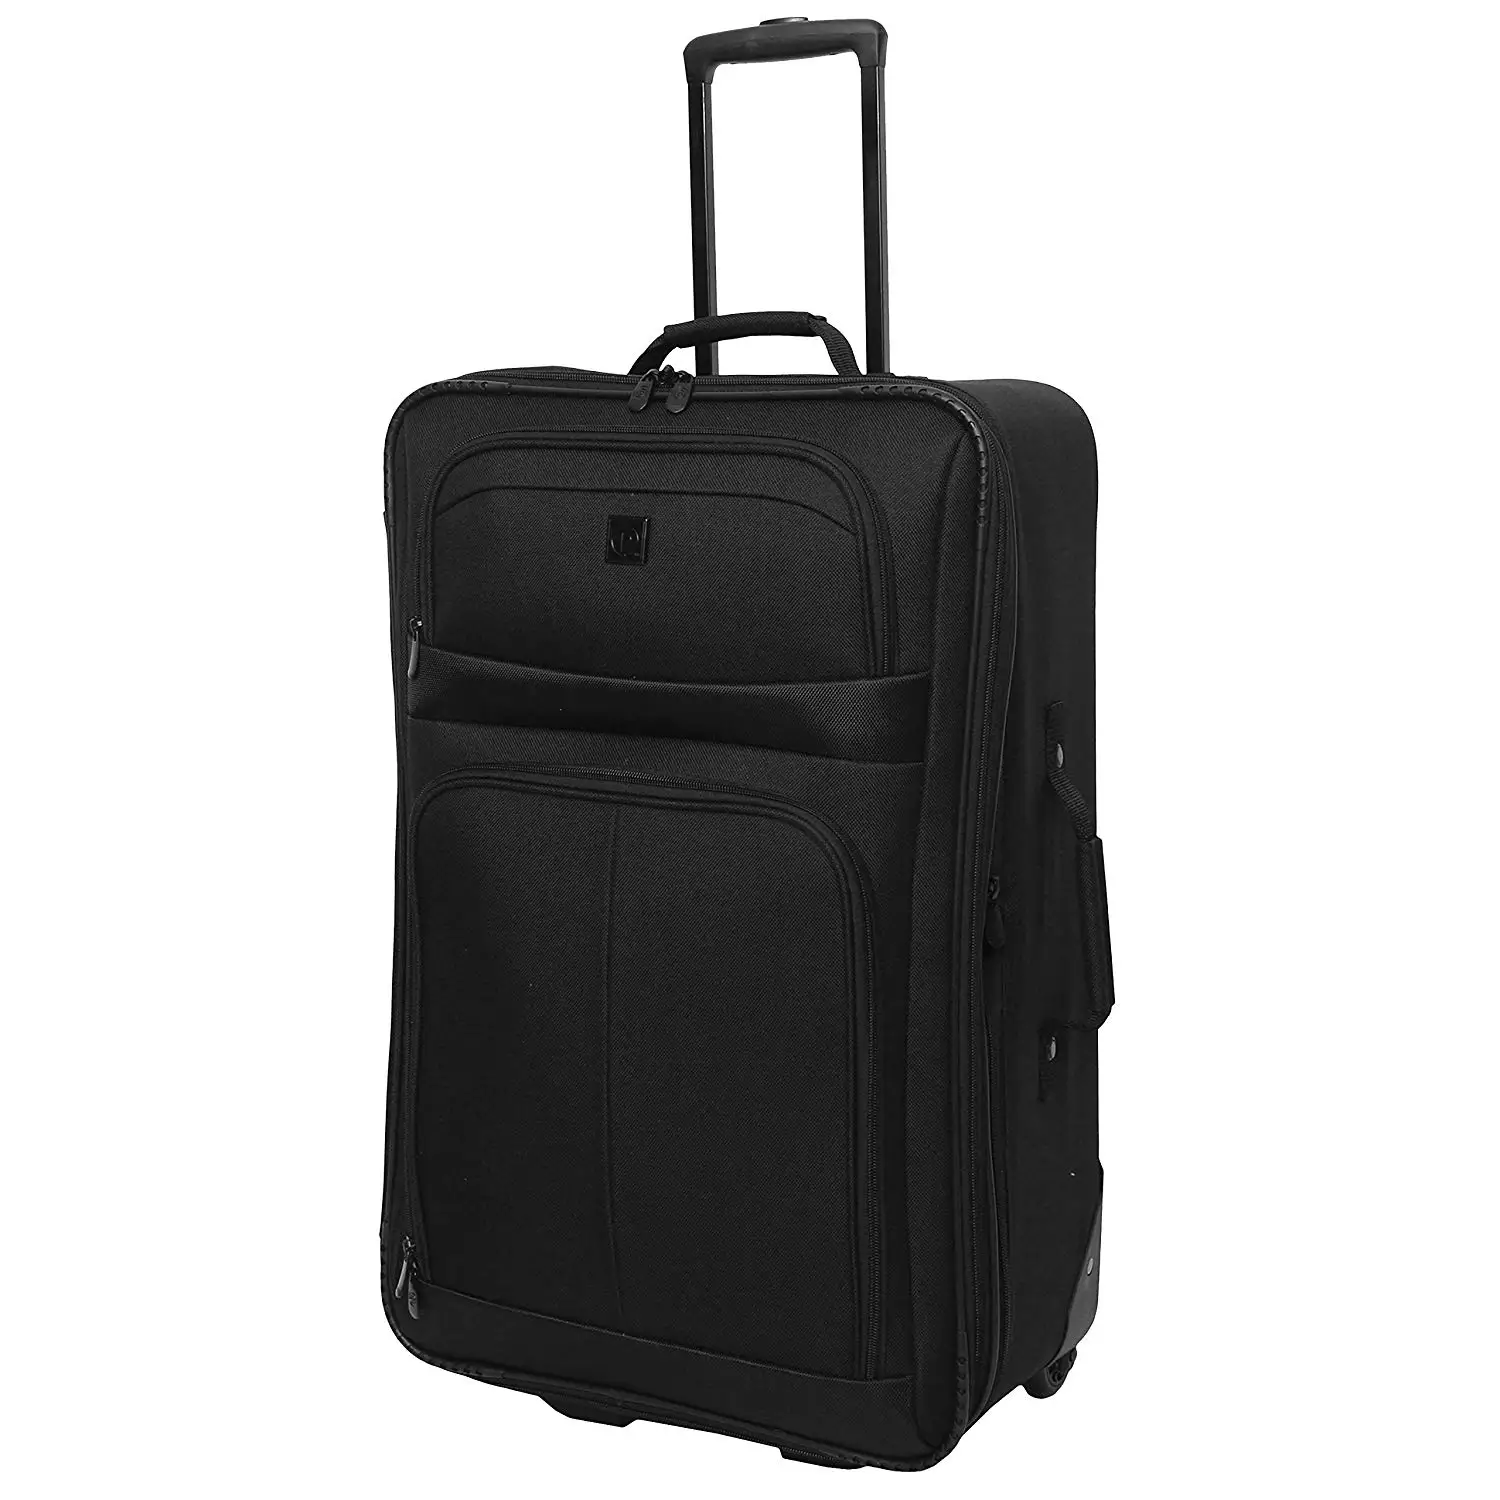 reviews of protege luggage bags